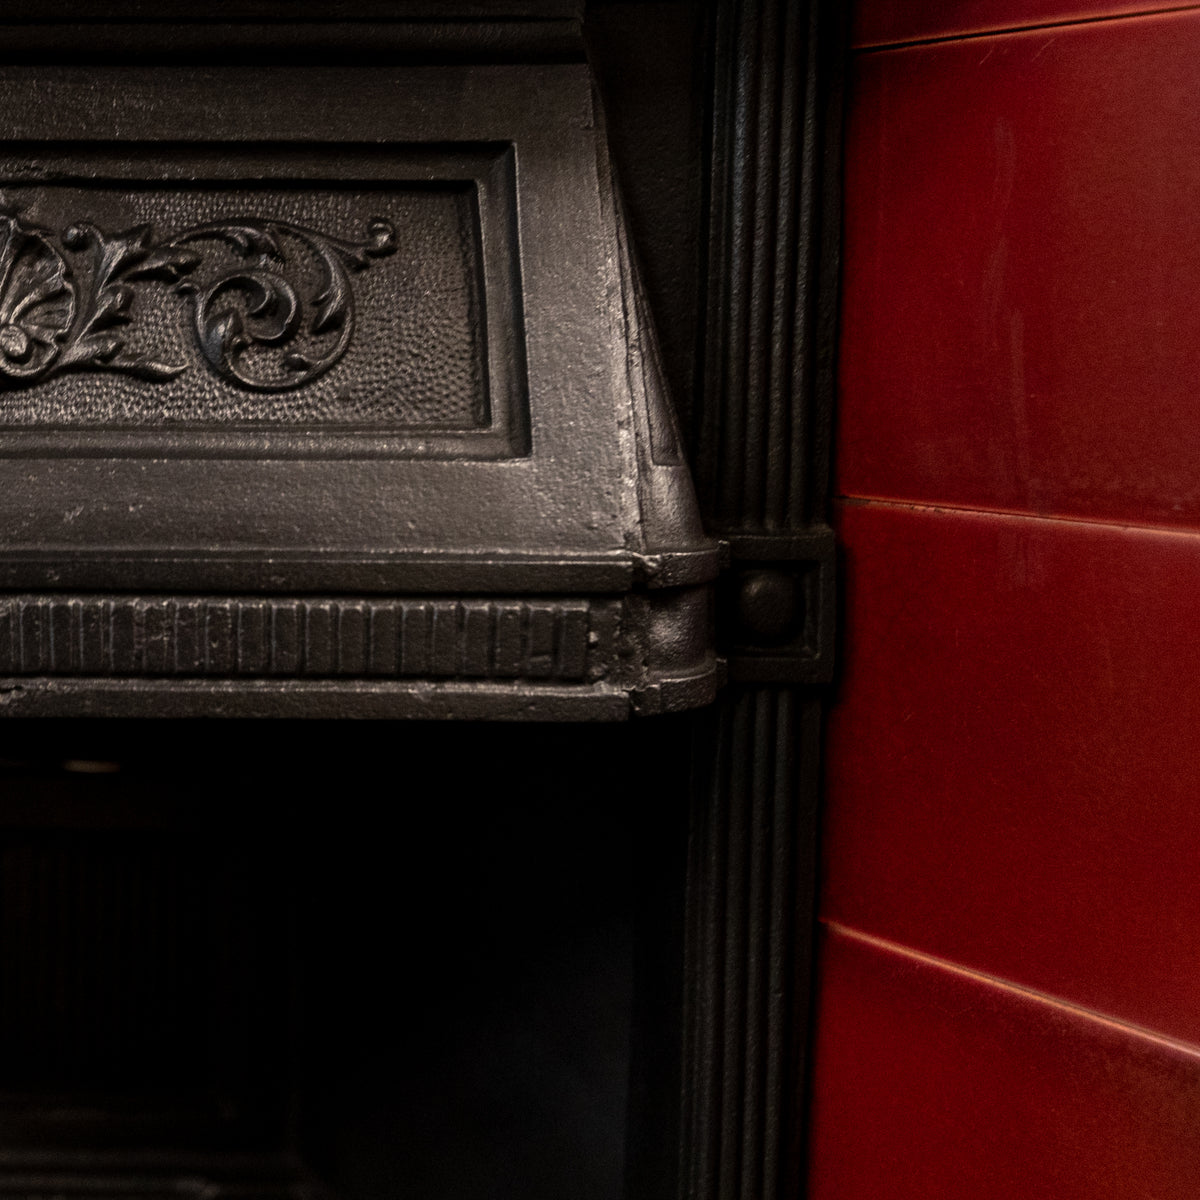 Antique Edwardian Cast Iron Combination Fireplace with Red Tiles | The Architectural Forum